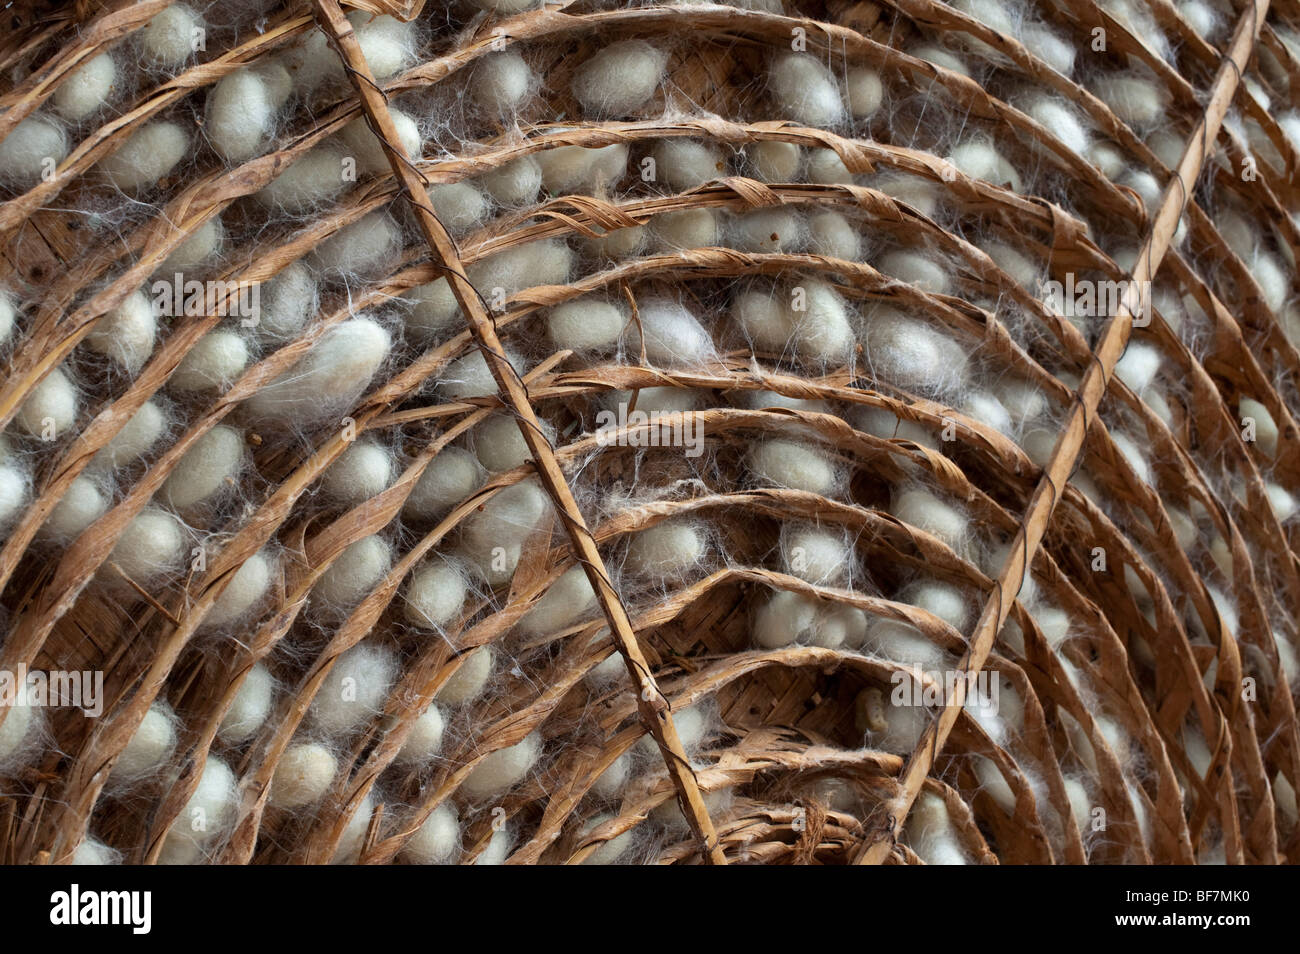 Silkworm cocoons in a traditional circular bamboo frame in the production of silk on an Indian farm. Andhra Pradesh, India Stock Photo